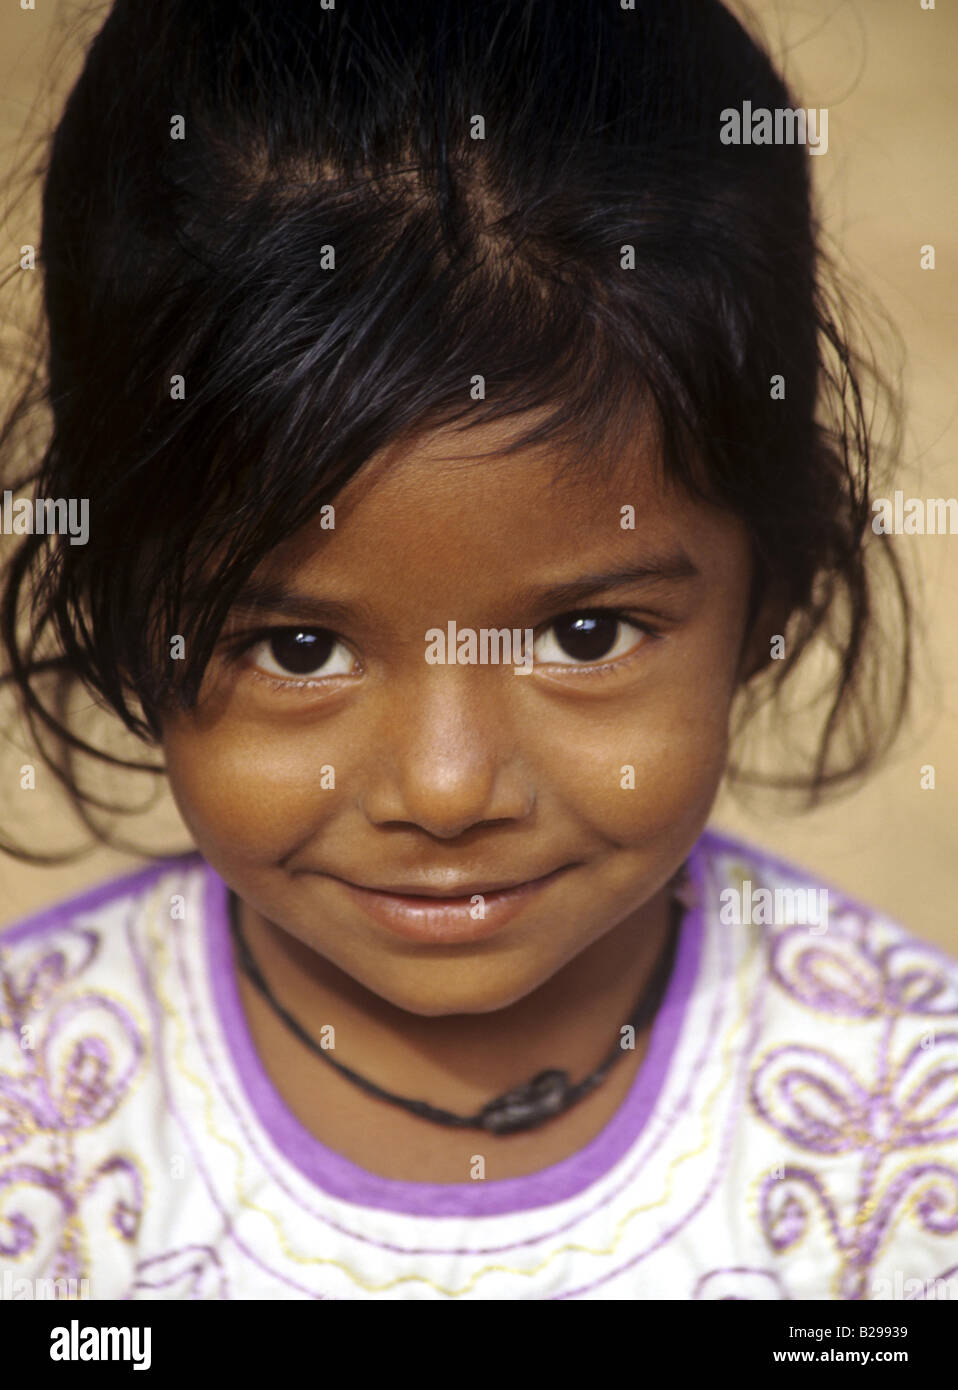 Local Girl Goa State India Date 15 06 2008 Ref ZB548 115573 0103 COMPULSORY CREDIT World Pictures Photoshot Stock Photo